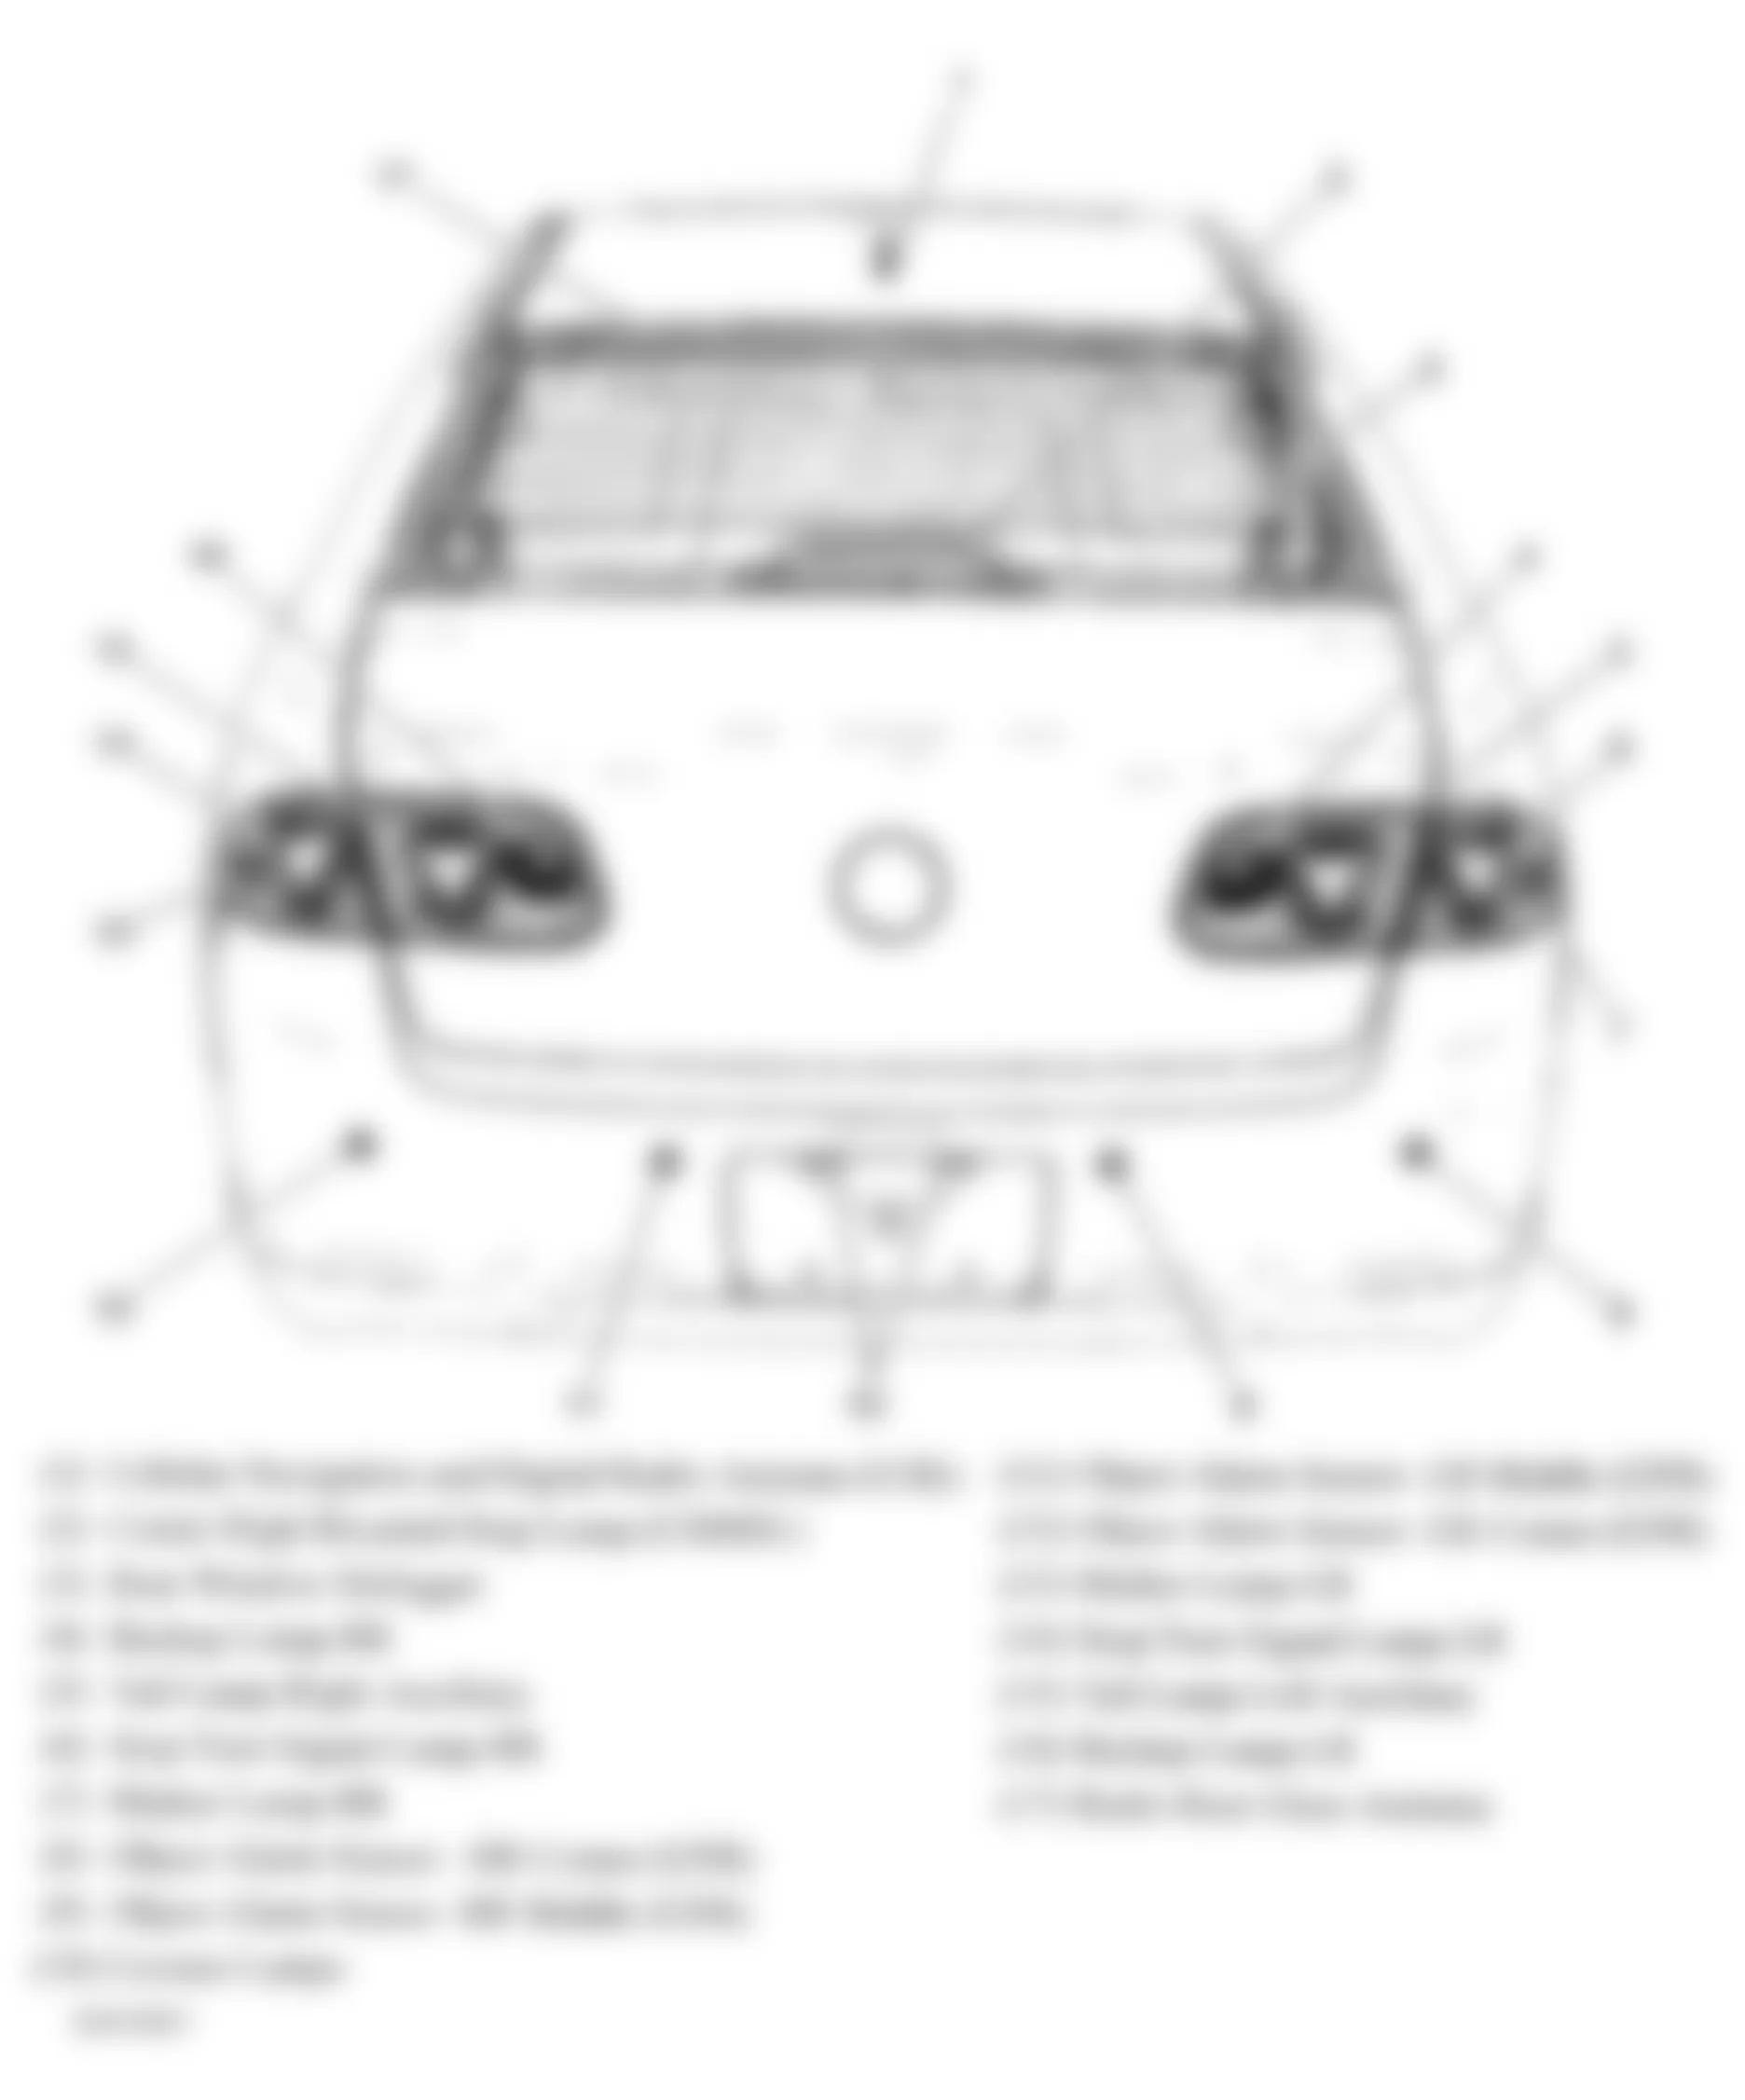 Buick Lucerne CXL 2010 - Component Locations -  Rear Of Vehicle